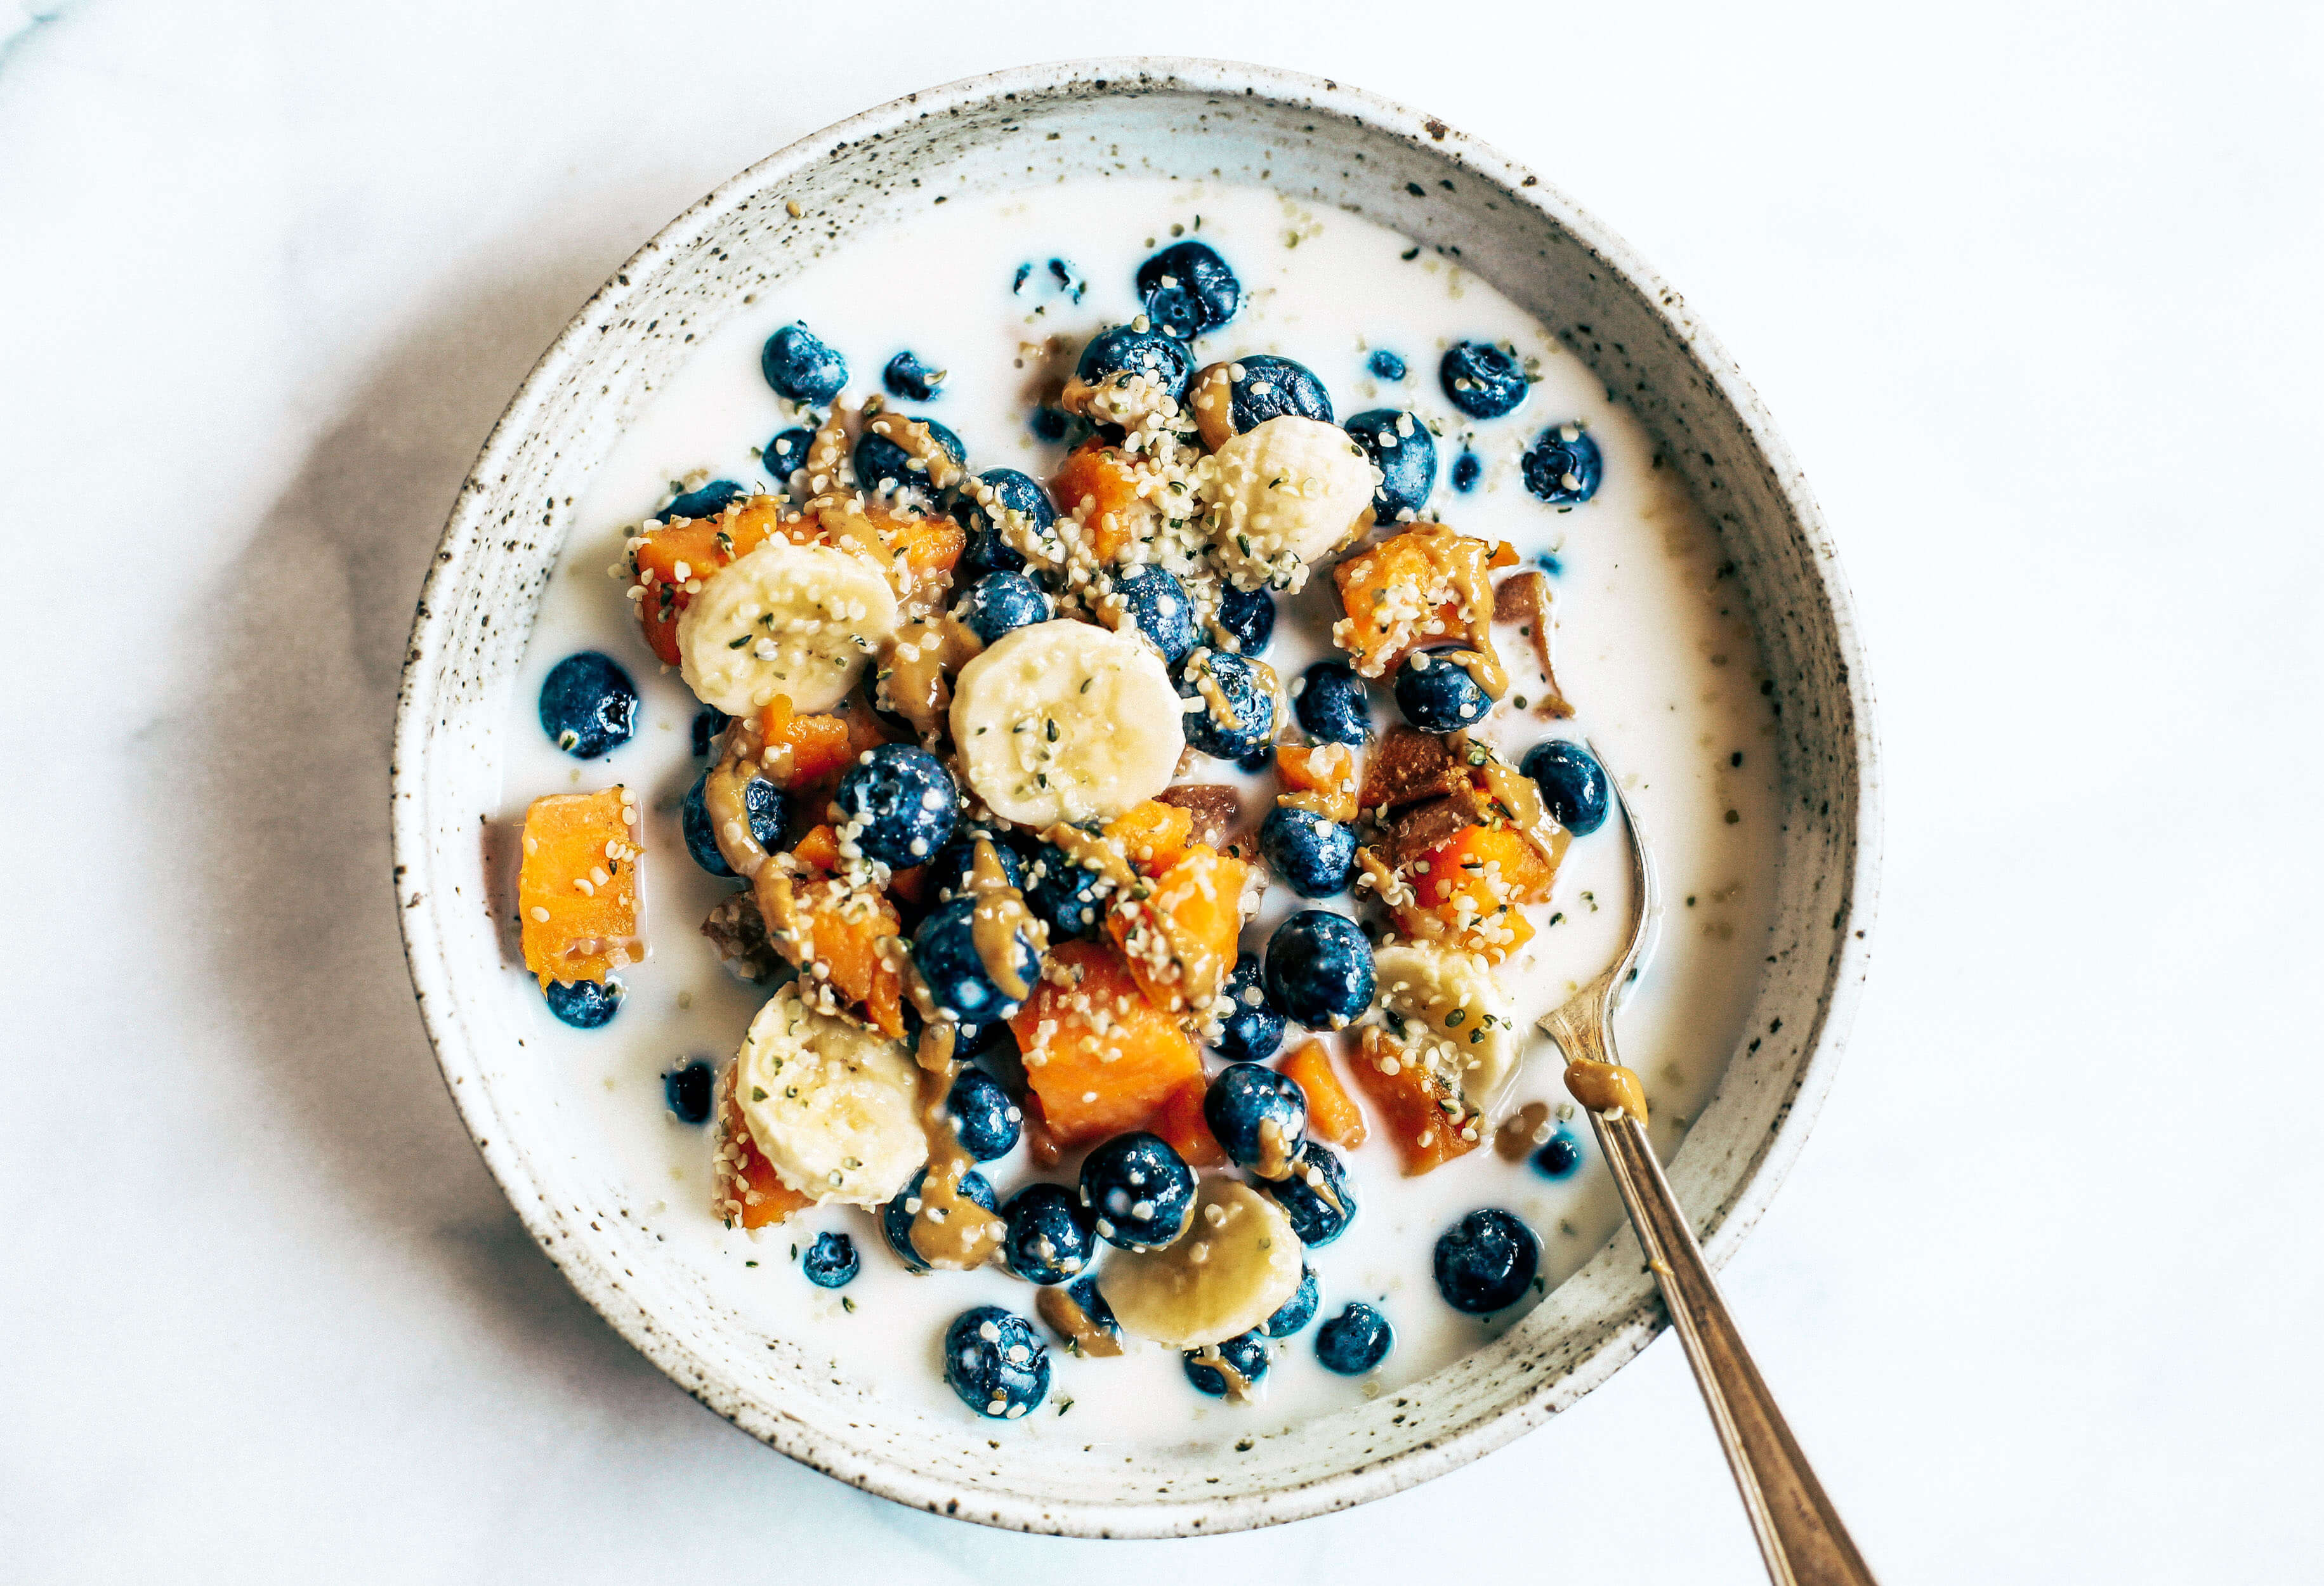 Easiest low calorie healthy breakfast! Sweet potato fruit cereal is made with baked sweet potato, fresh fruit, and nut milk of choice. This is a perfect paleo whole30 breakfast for on the go. #paleo #whole30 #mealprep #healthybreakfast